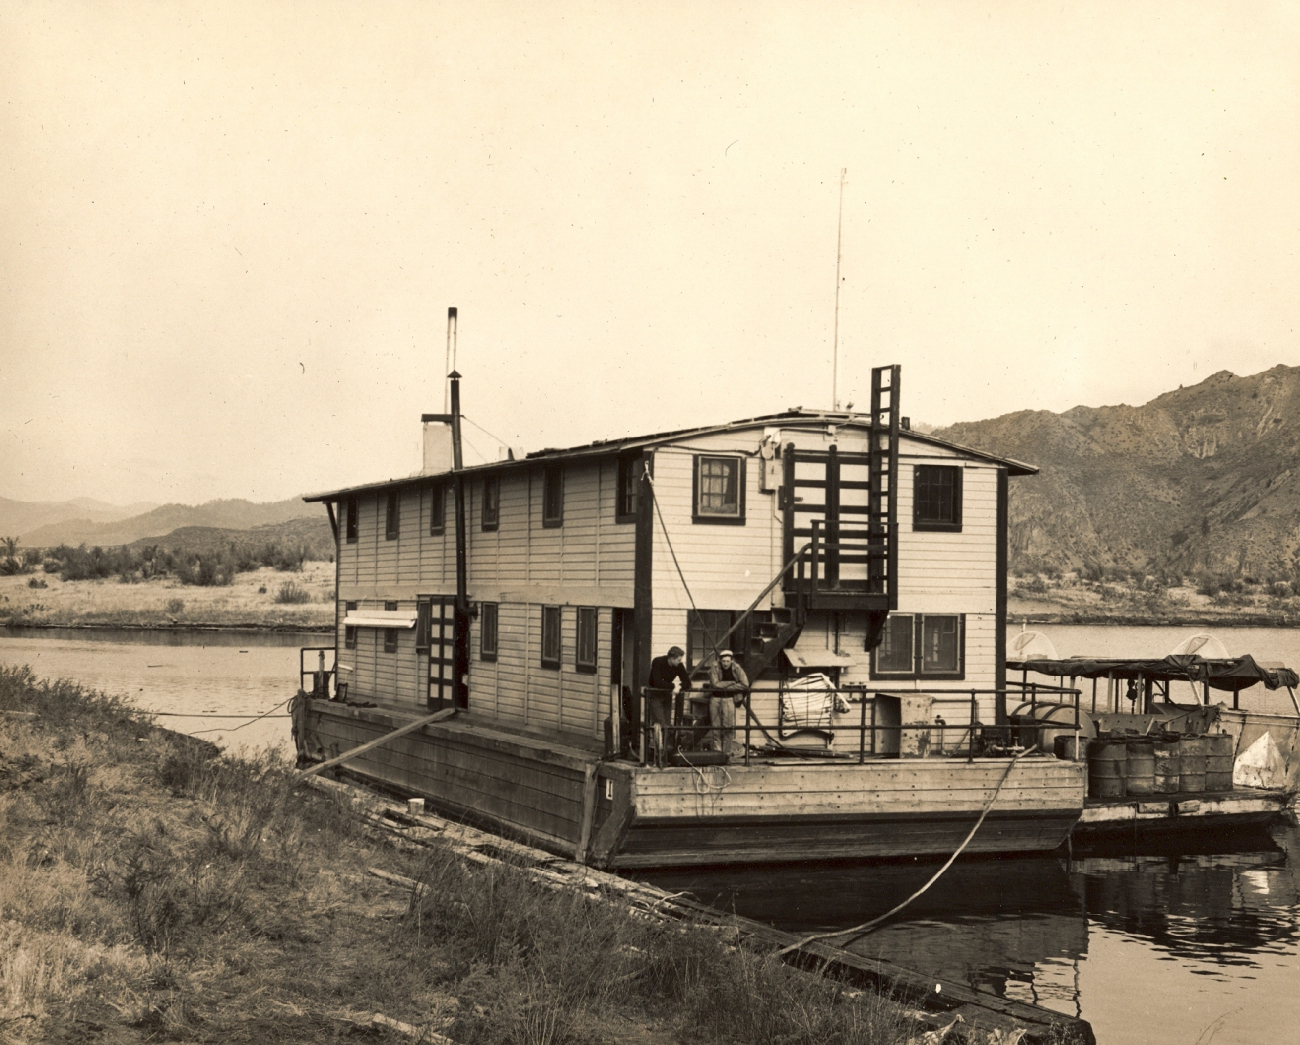 Living quarters for the field party while surveying theGrand Coulee Dam reservoir